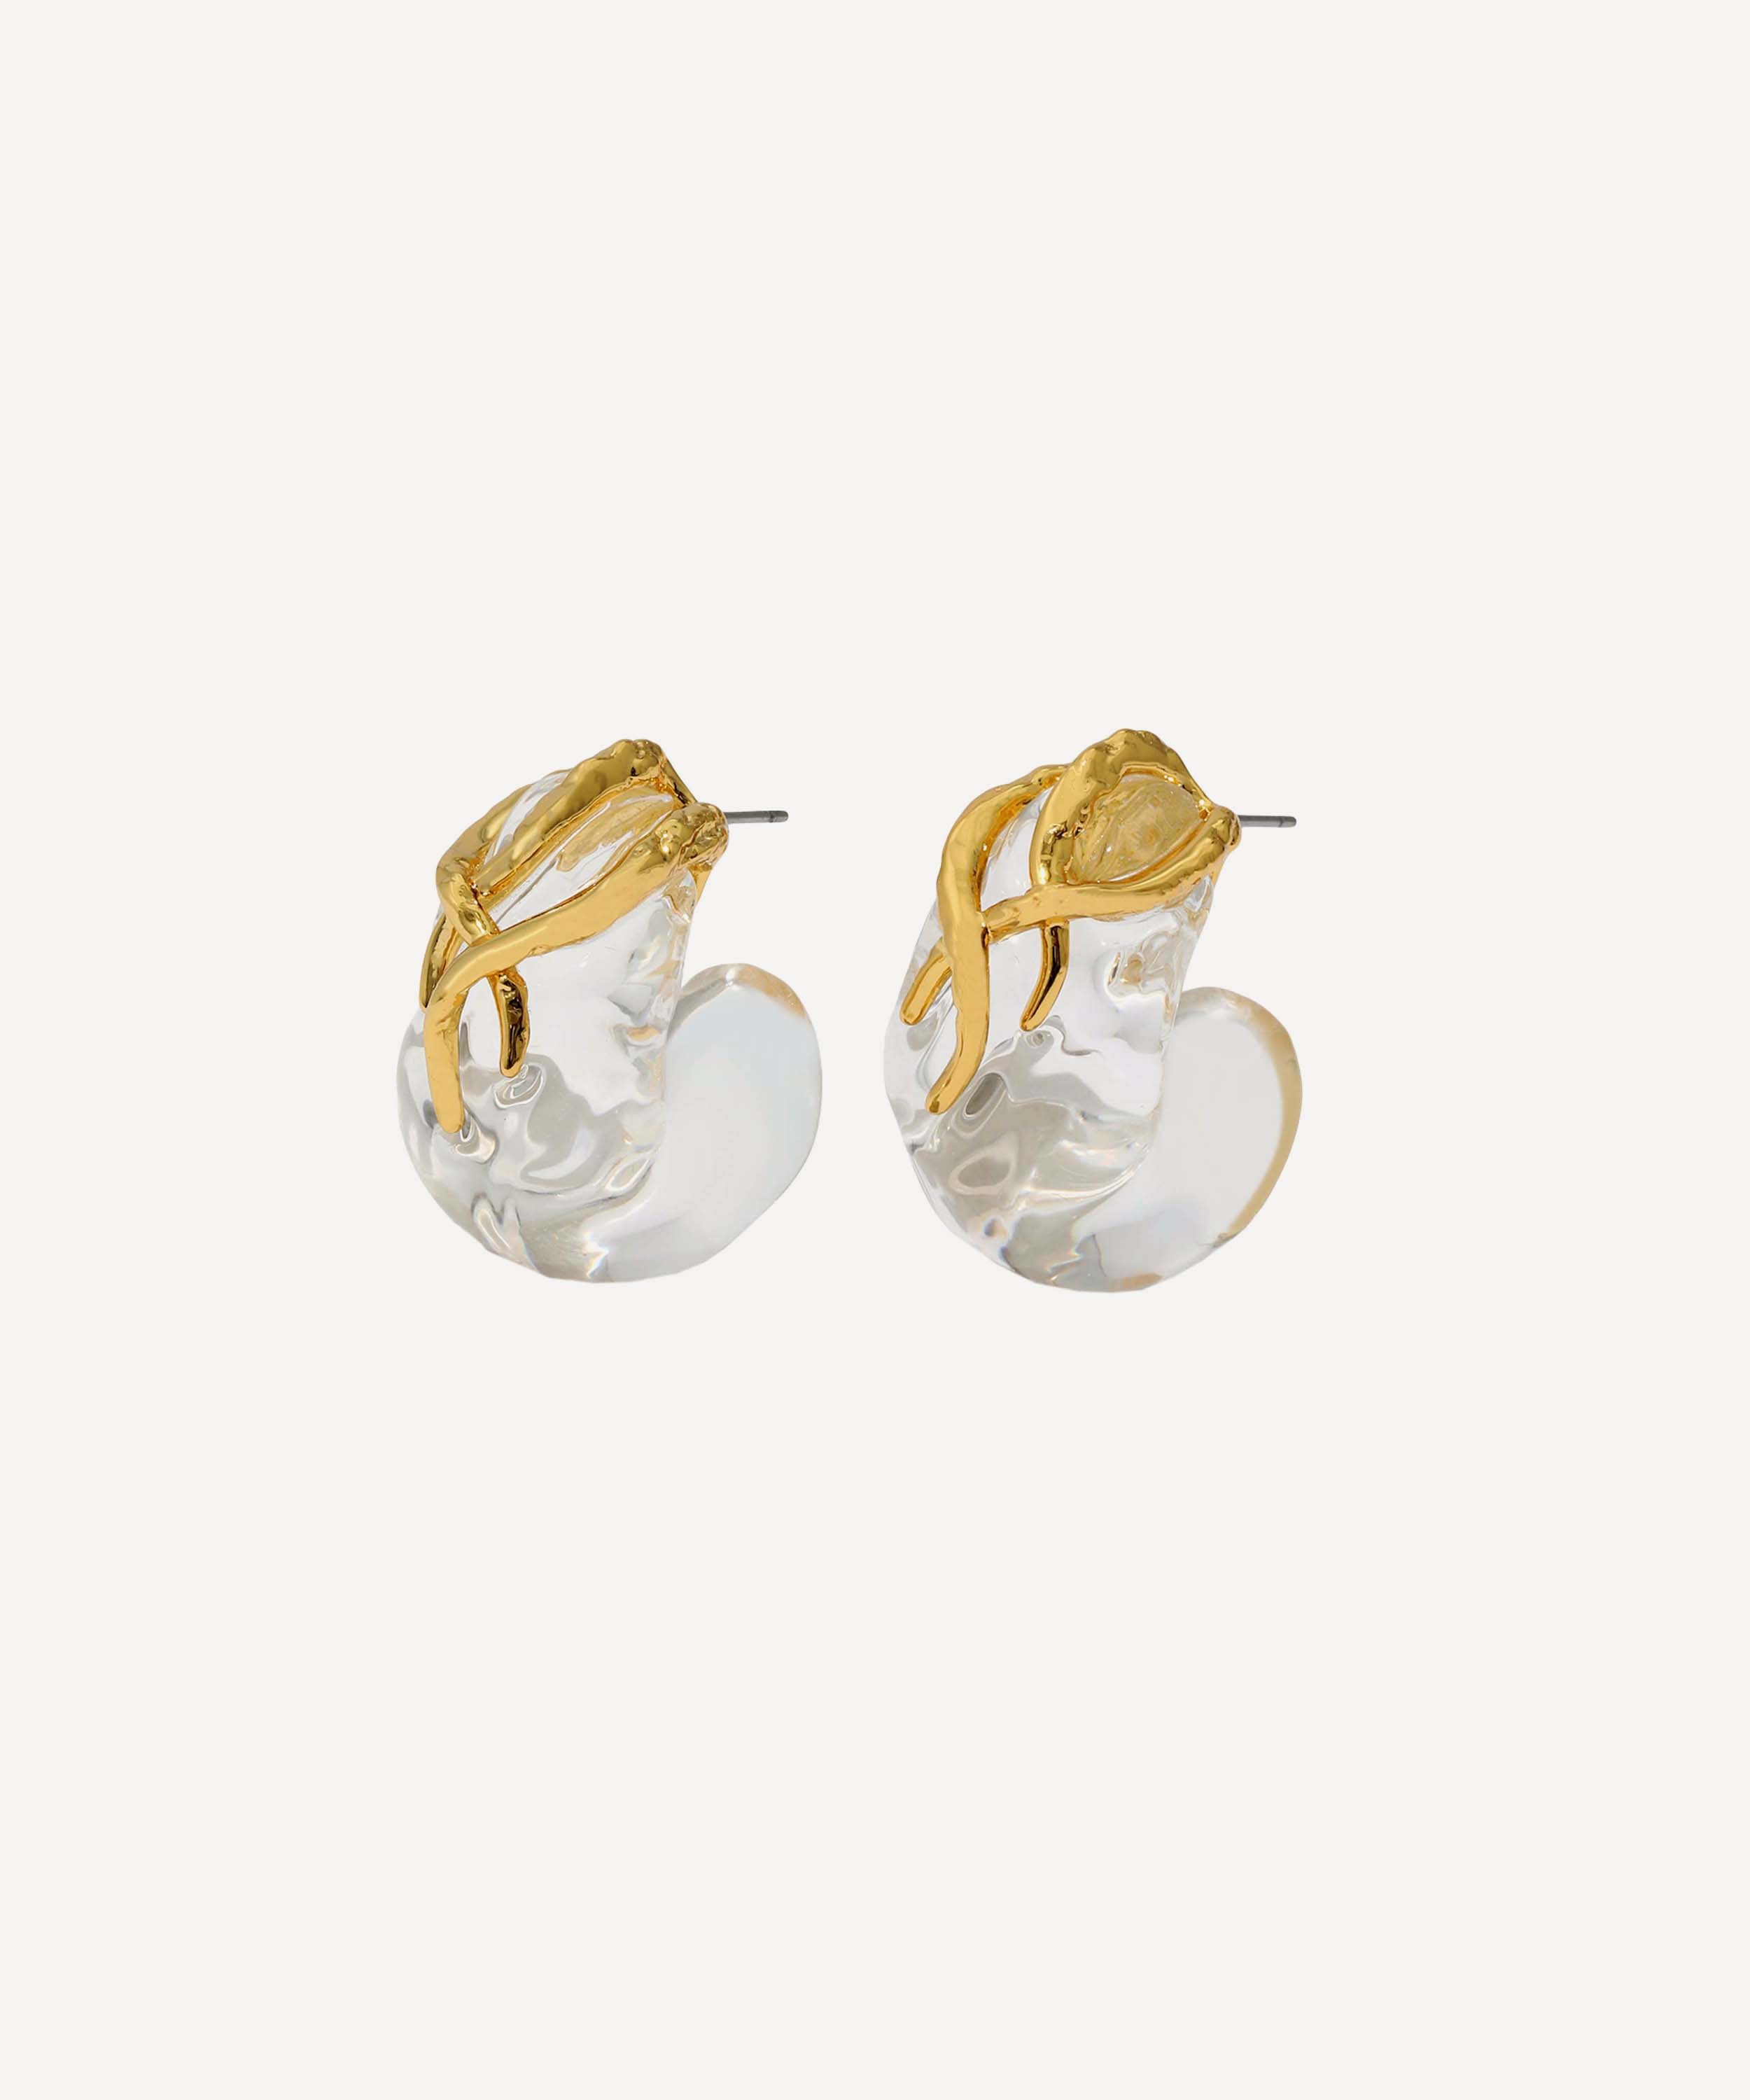 Alexis Bittar - 14ct Gold-Plated Liquid Vine Lucite Small Hoop Earrings